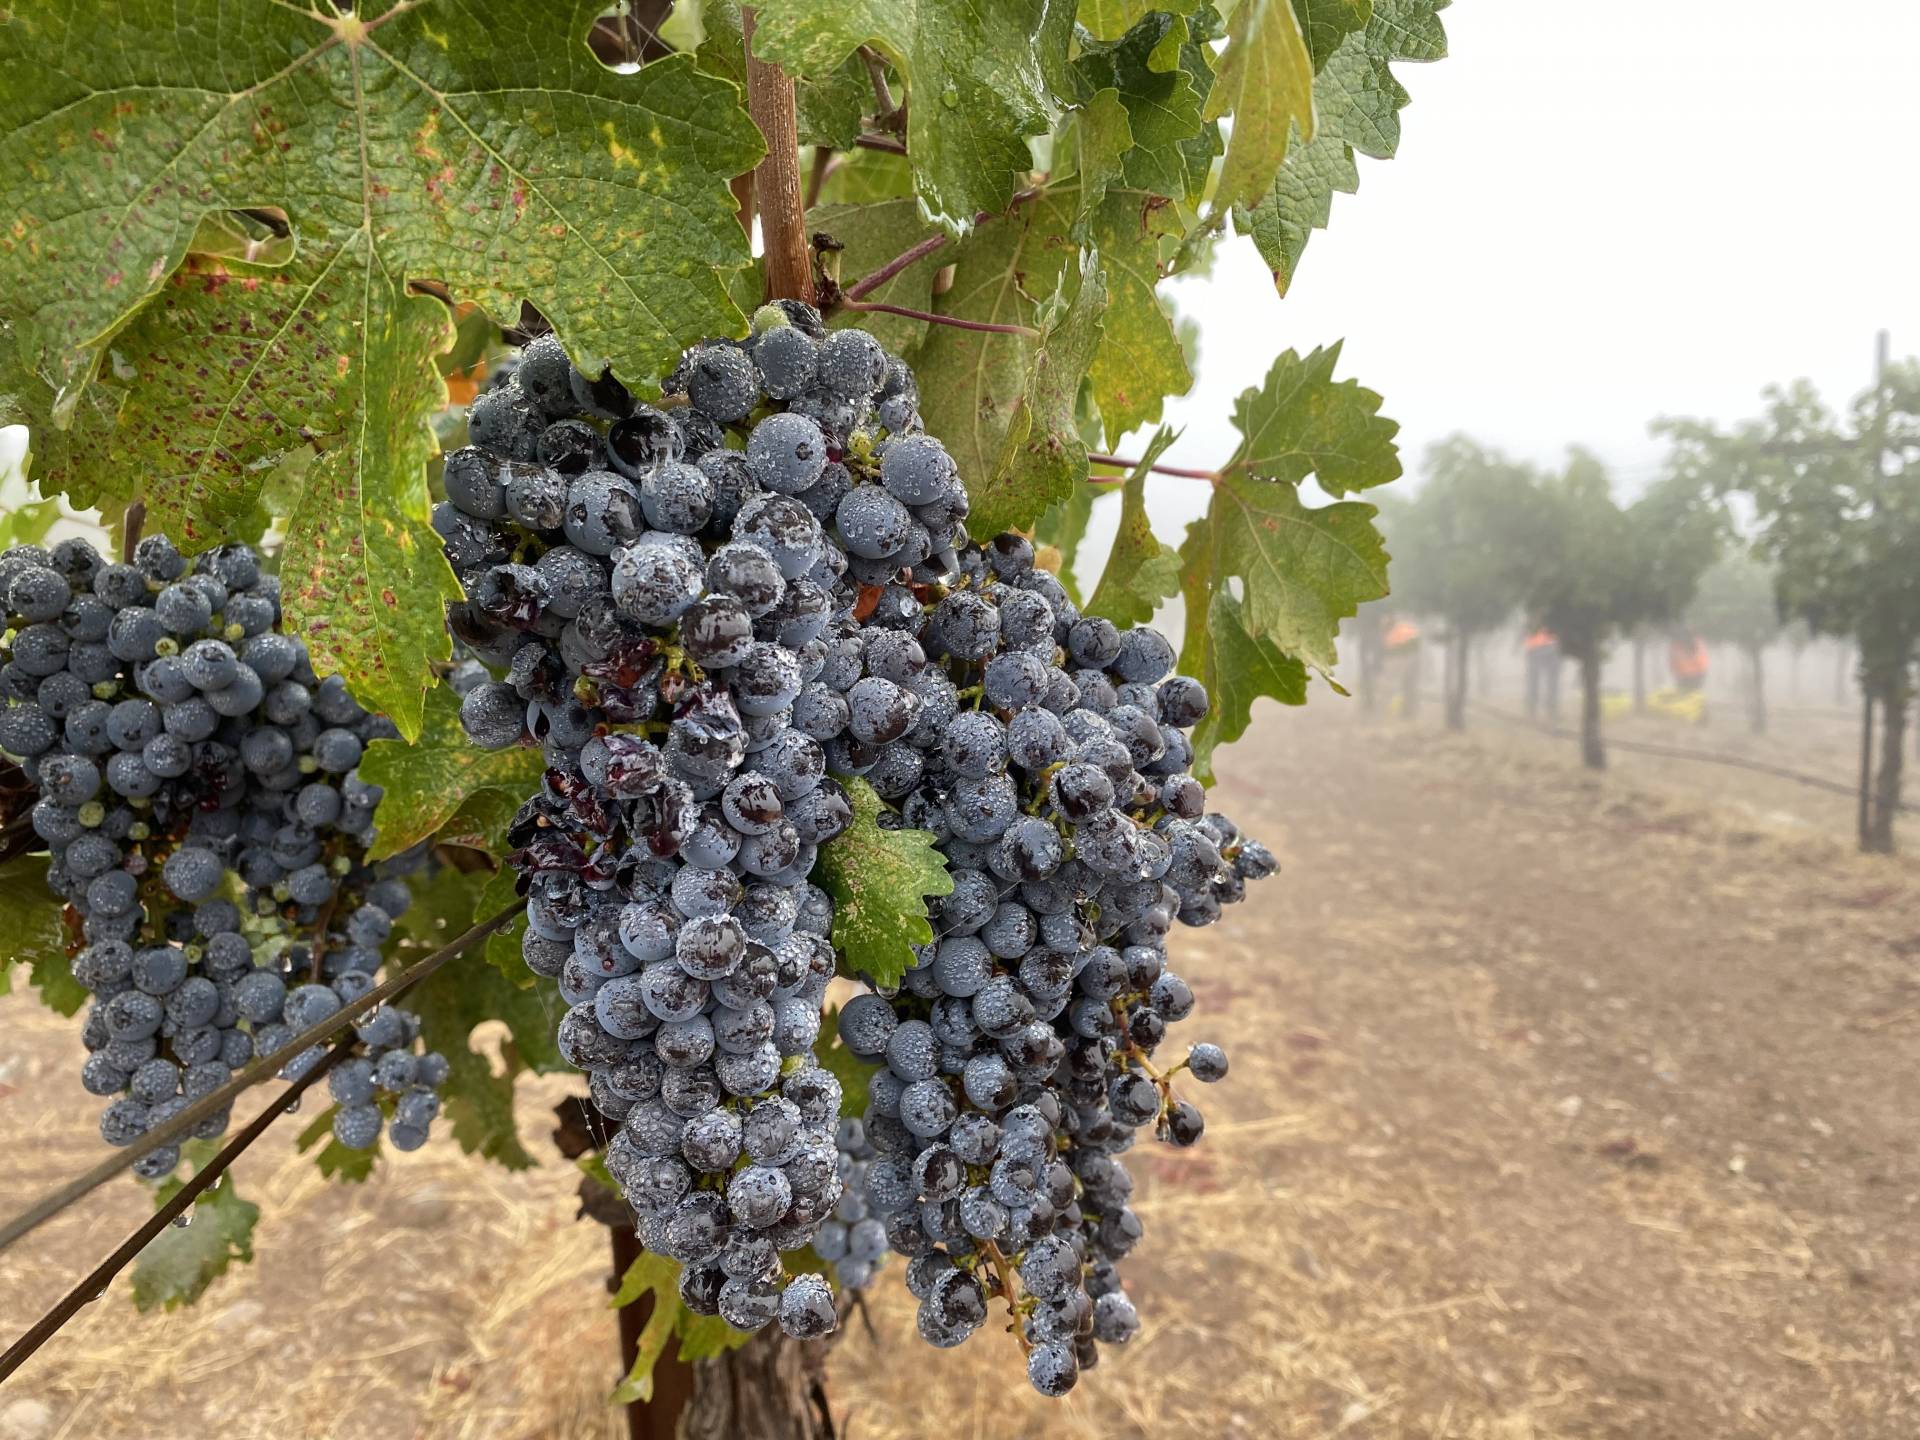 A grapevine in Sonoma County. The grapes are grown without any irrigation water.